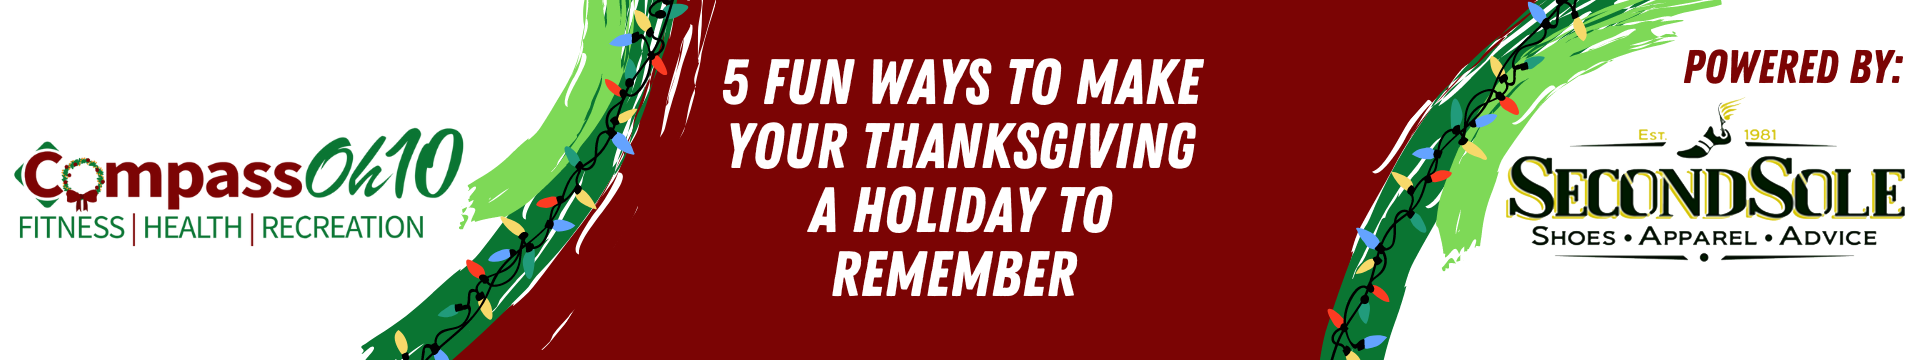 5 Fun Ways to Make Your Thanksgiving a Holiday to Remember